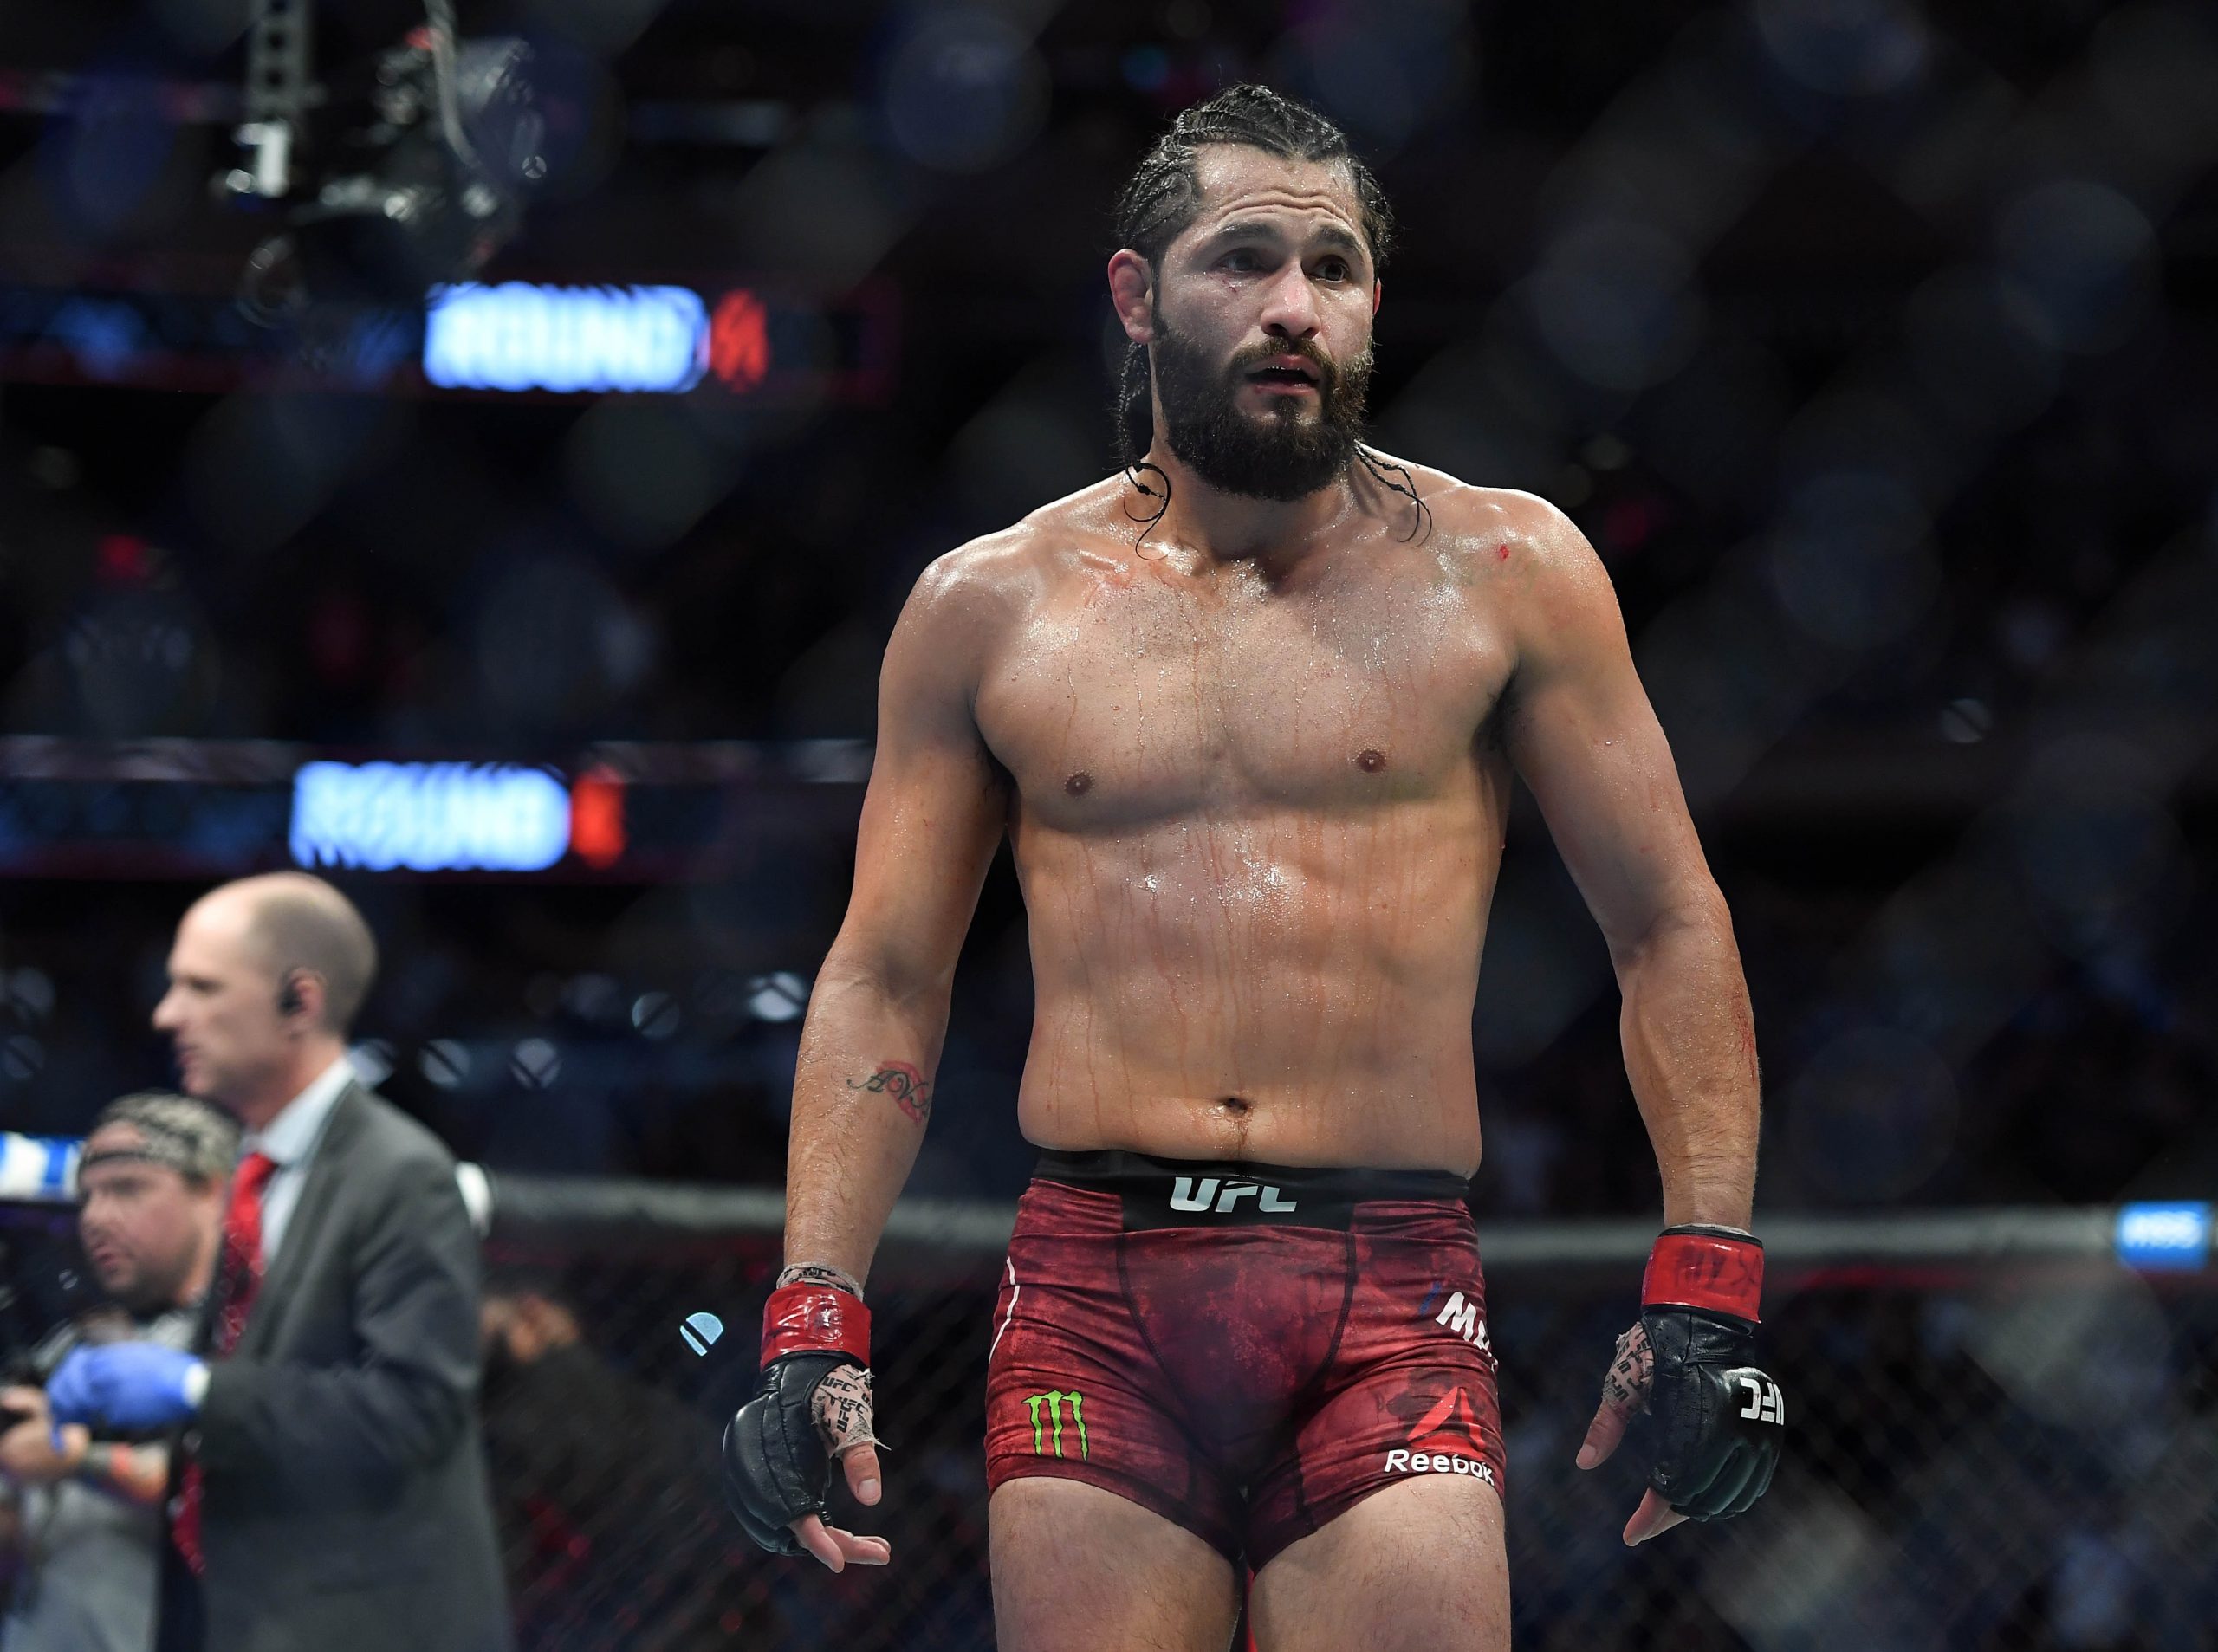 orge Masvidal (red gloves) defeats Nate Diaz